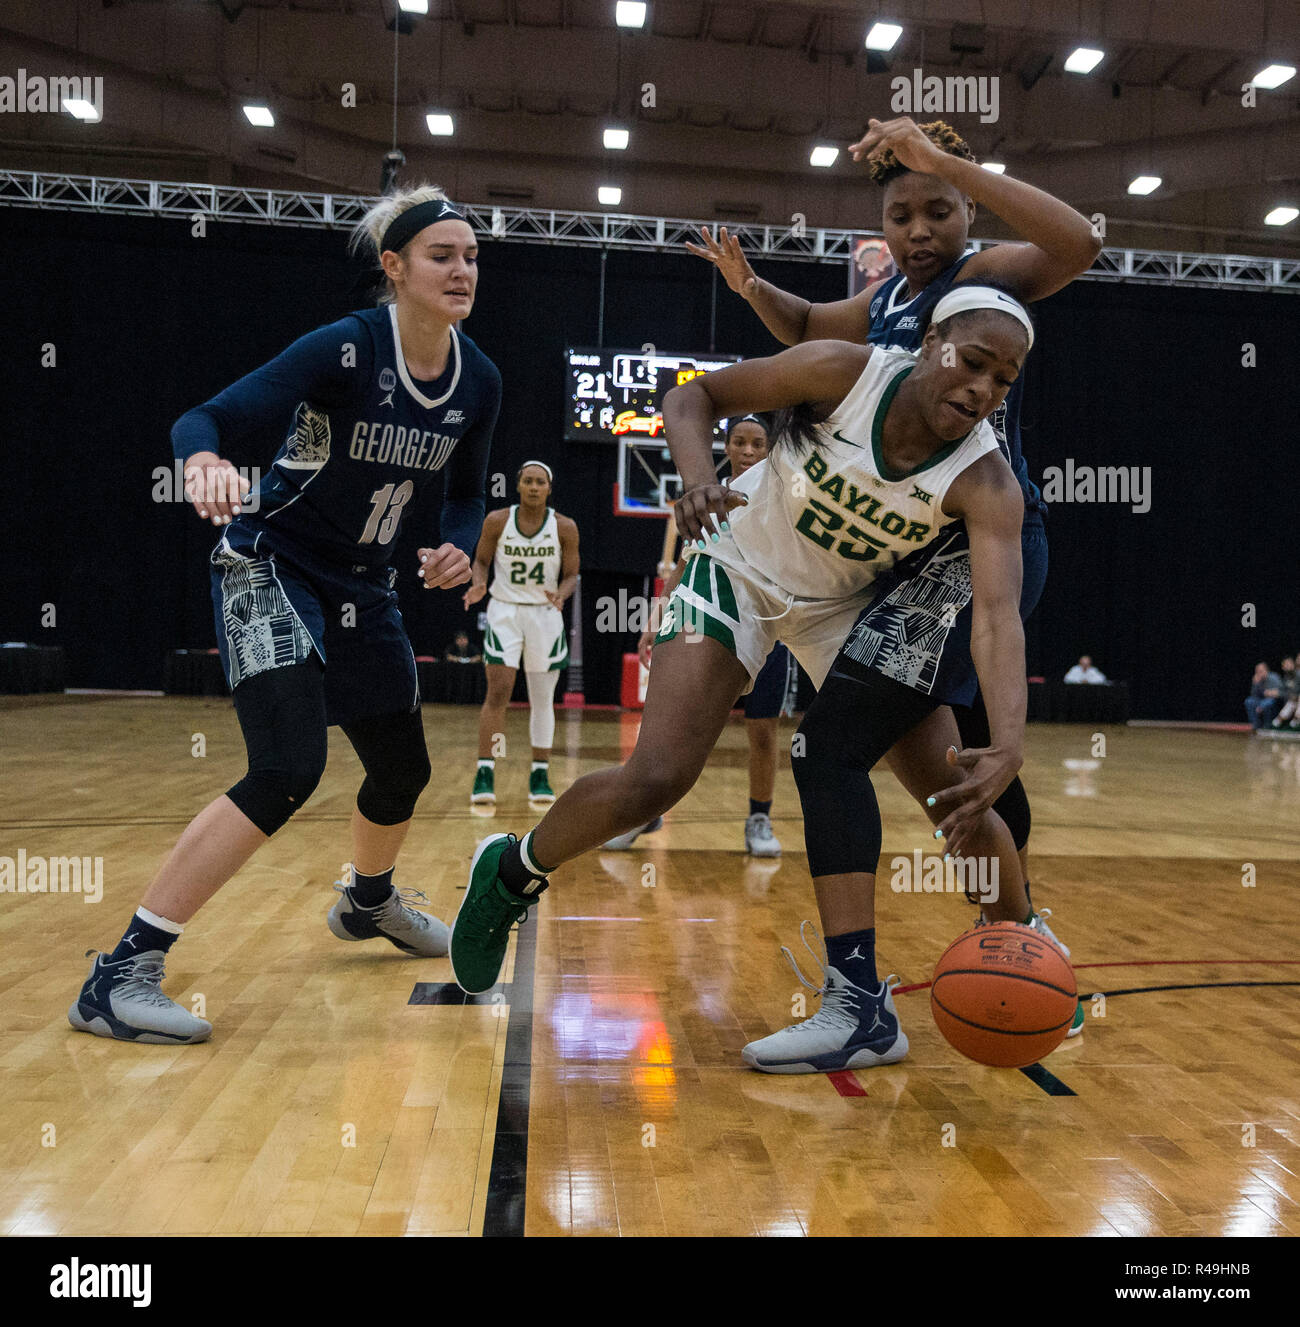 Nov 24 2018 Las Vegas, NV U.S.A. Baylor center Queen Egbo (25) battle for the rebound during the NCAA Women's Basketball Thanksgiving Shootout between Baylor Bears and the Georgetown Hoyas 67-46 win at South Point Arena Las Vegas, NV. Thurman James/CSM Stock Photo